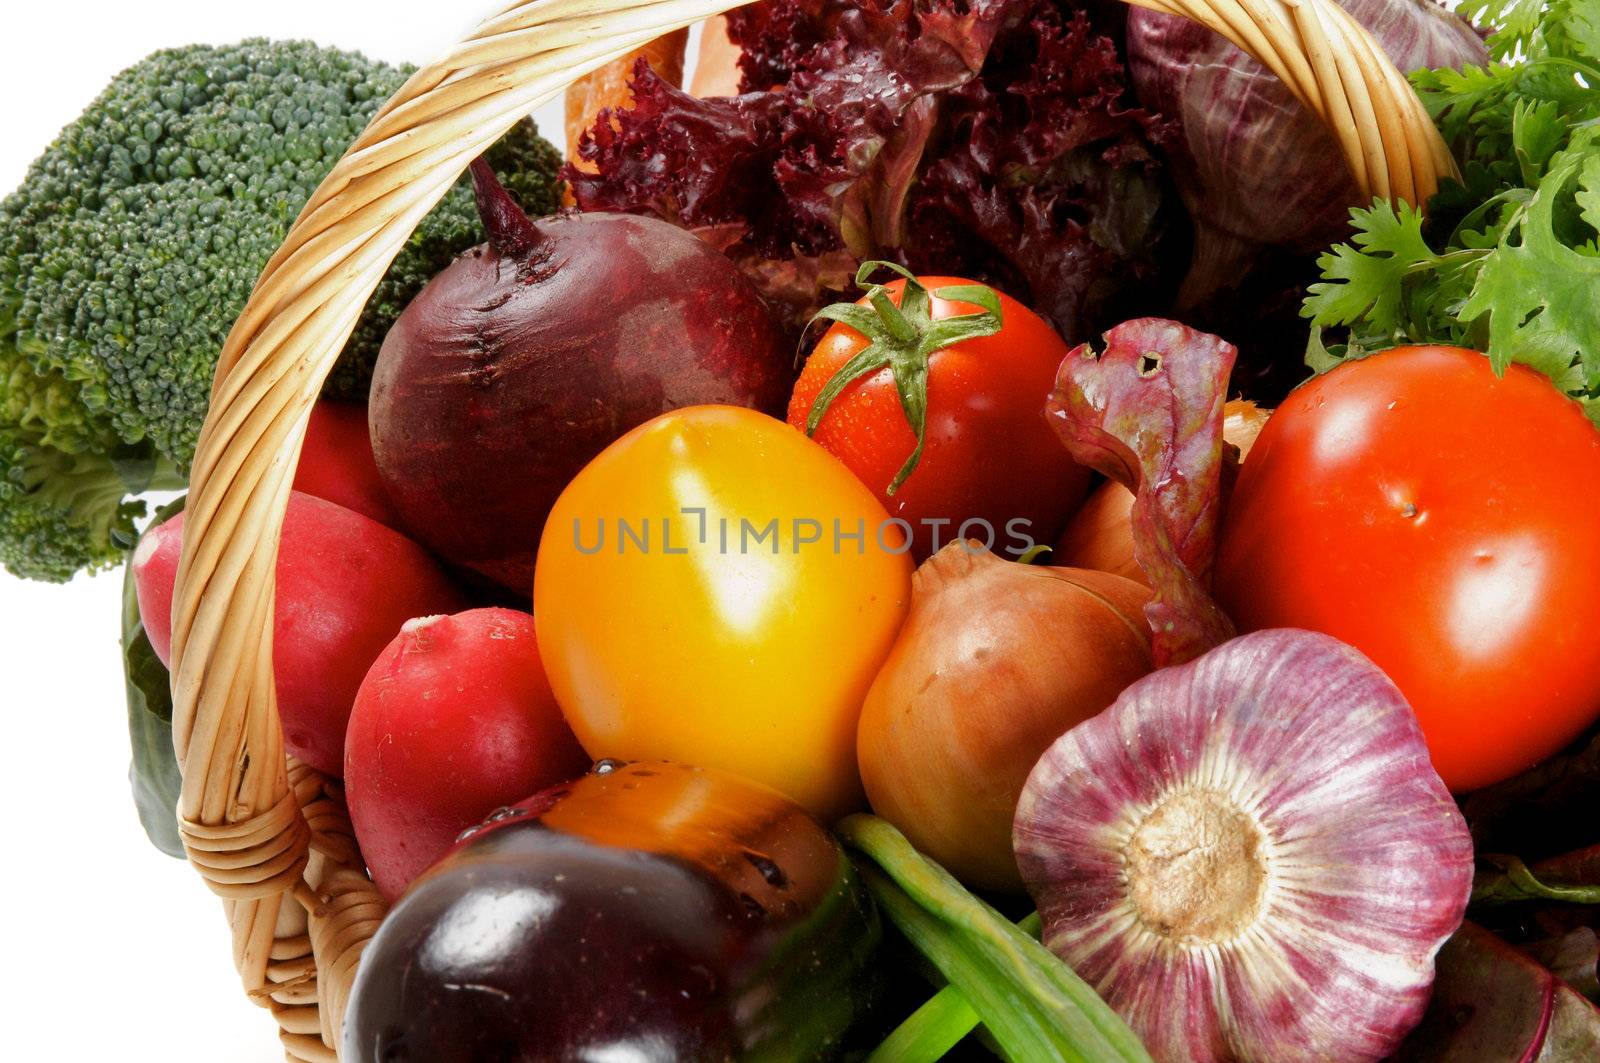 Basket of Various Vegetables with Broccoli, radishes, lettuce, onions, leeks, beets, carrots, red tomatoes, yellow tomatoes, parsley close up